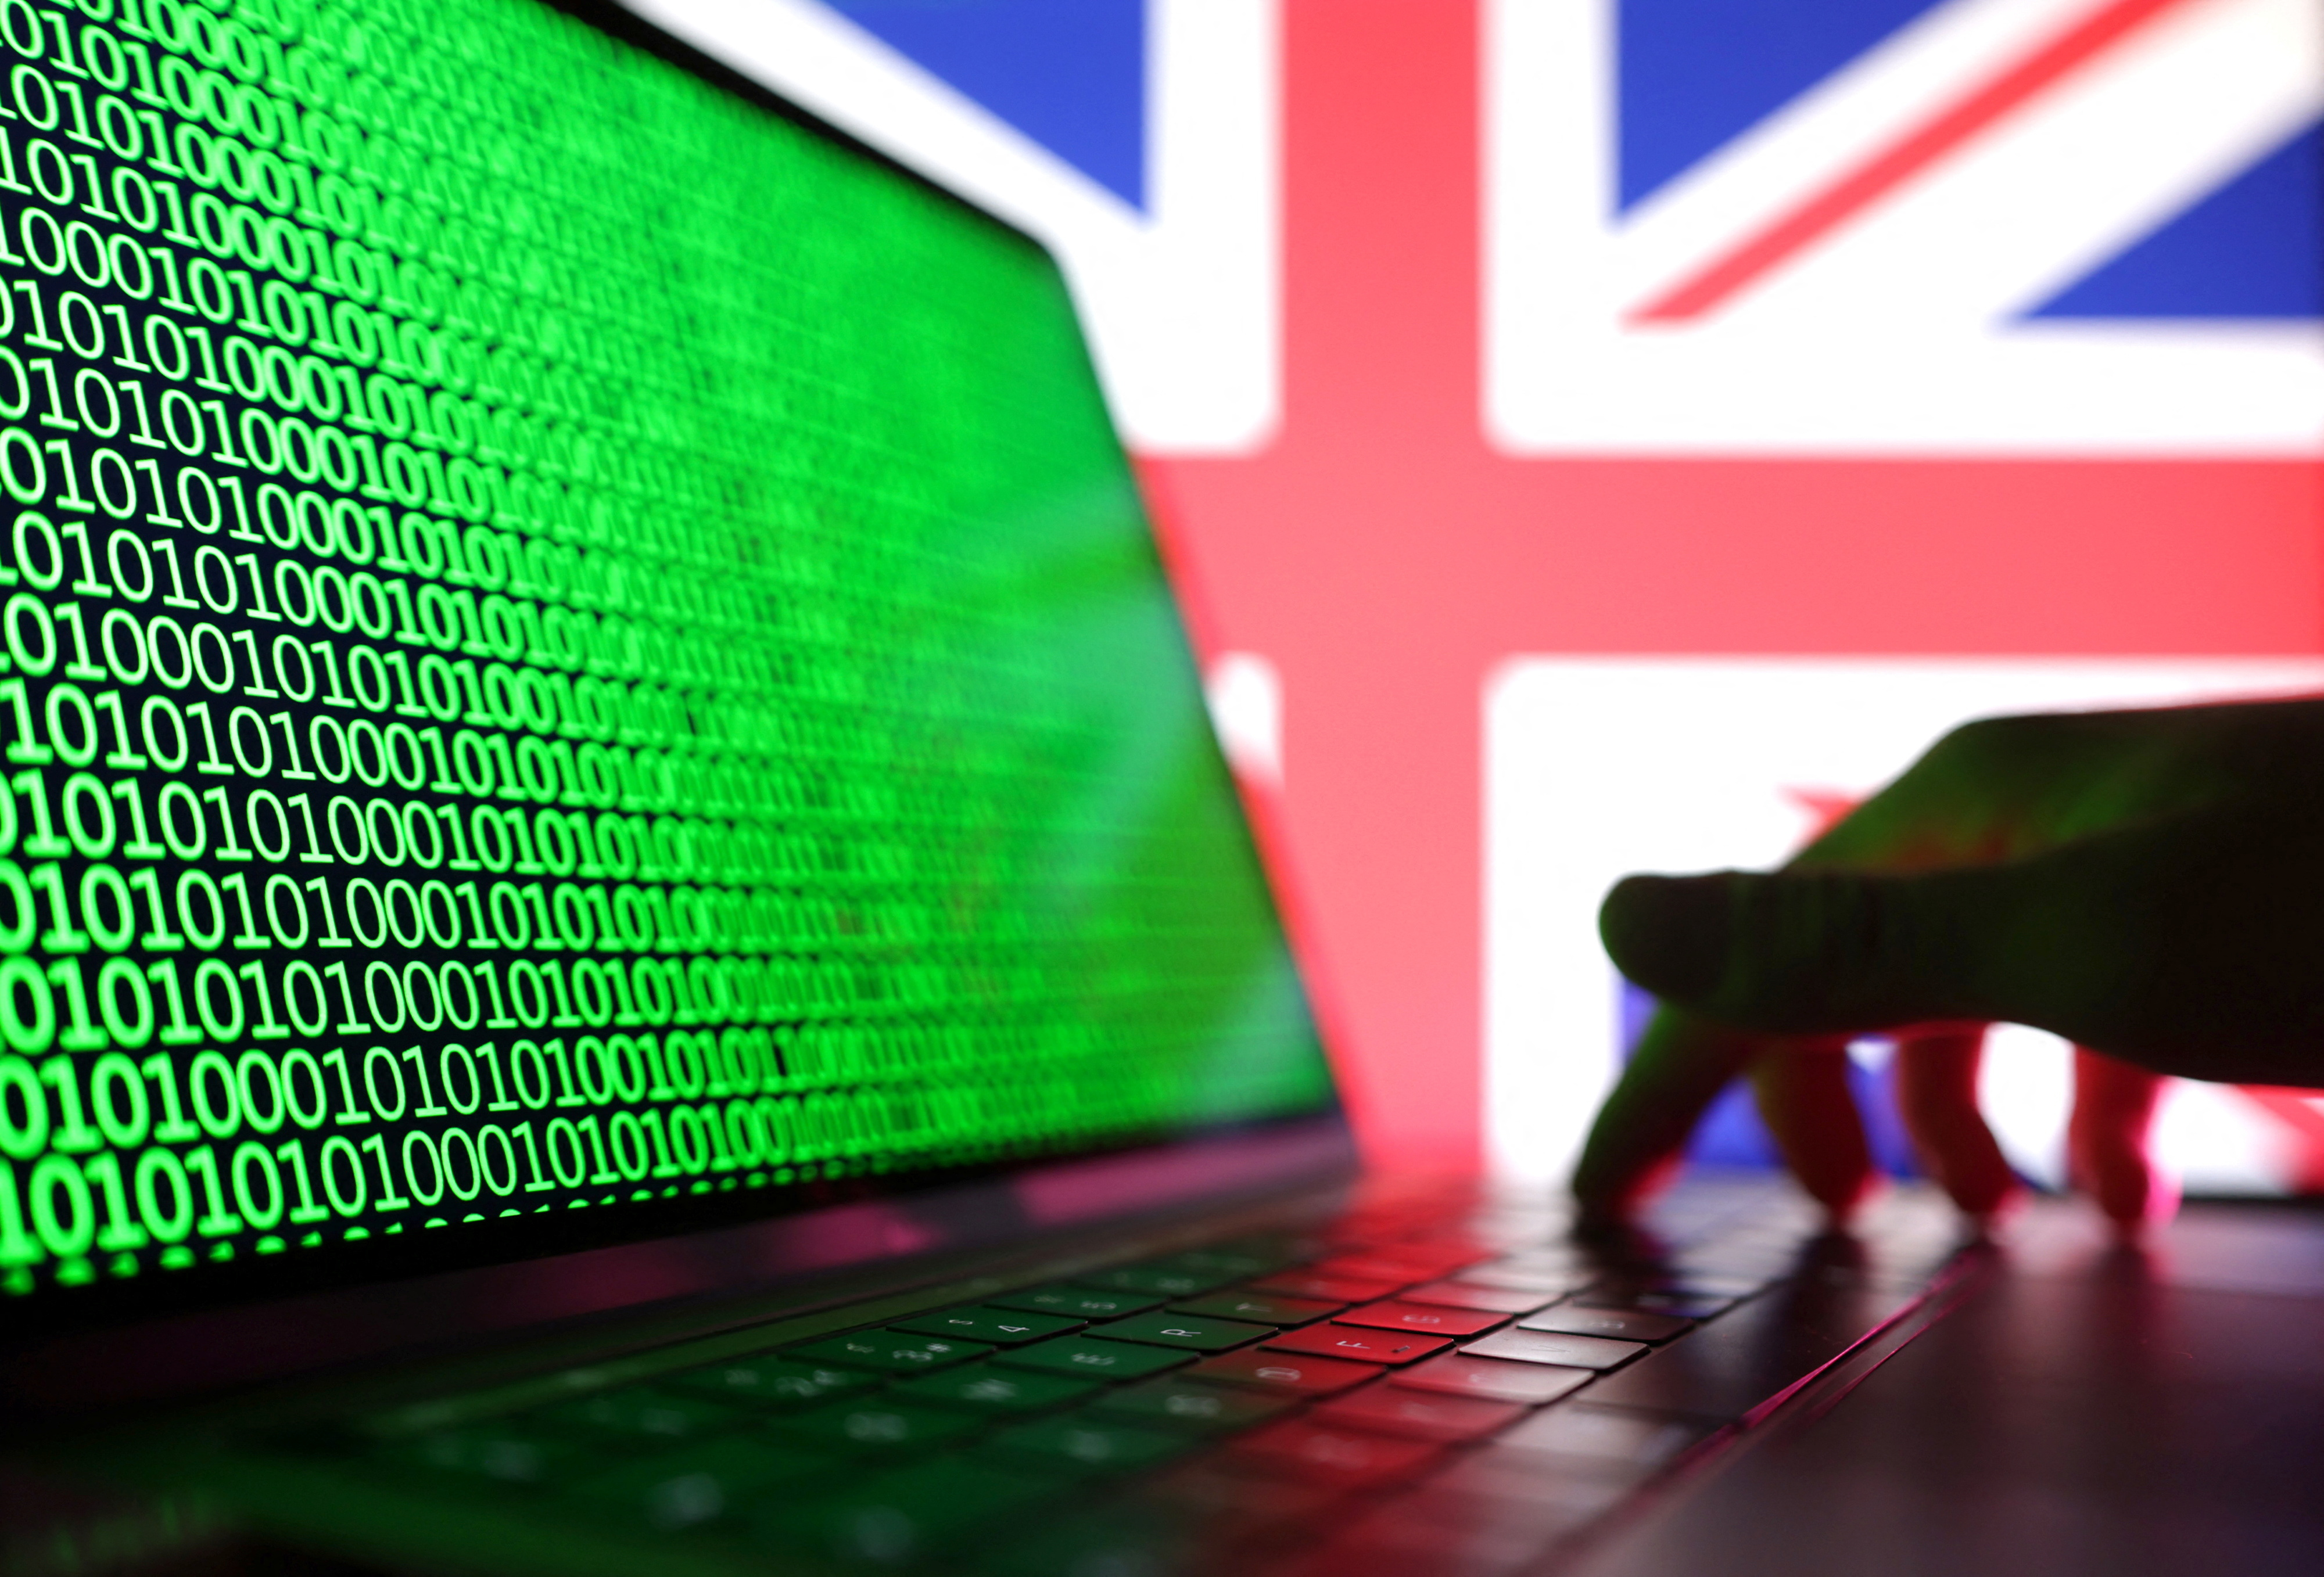 Illustration shows a laptop with binary codes displayed in front of the UK flag